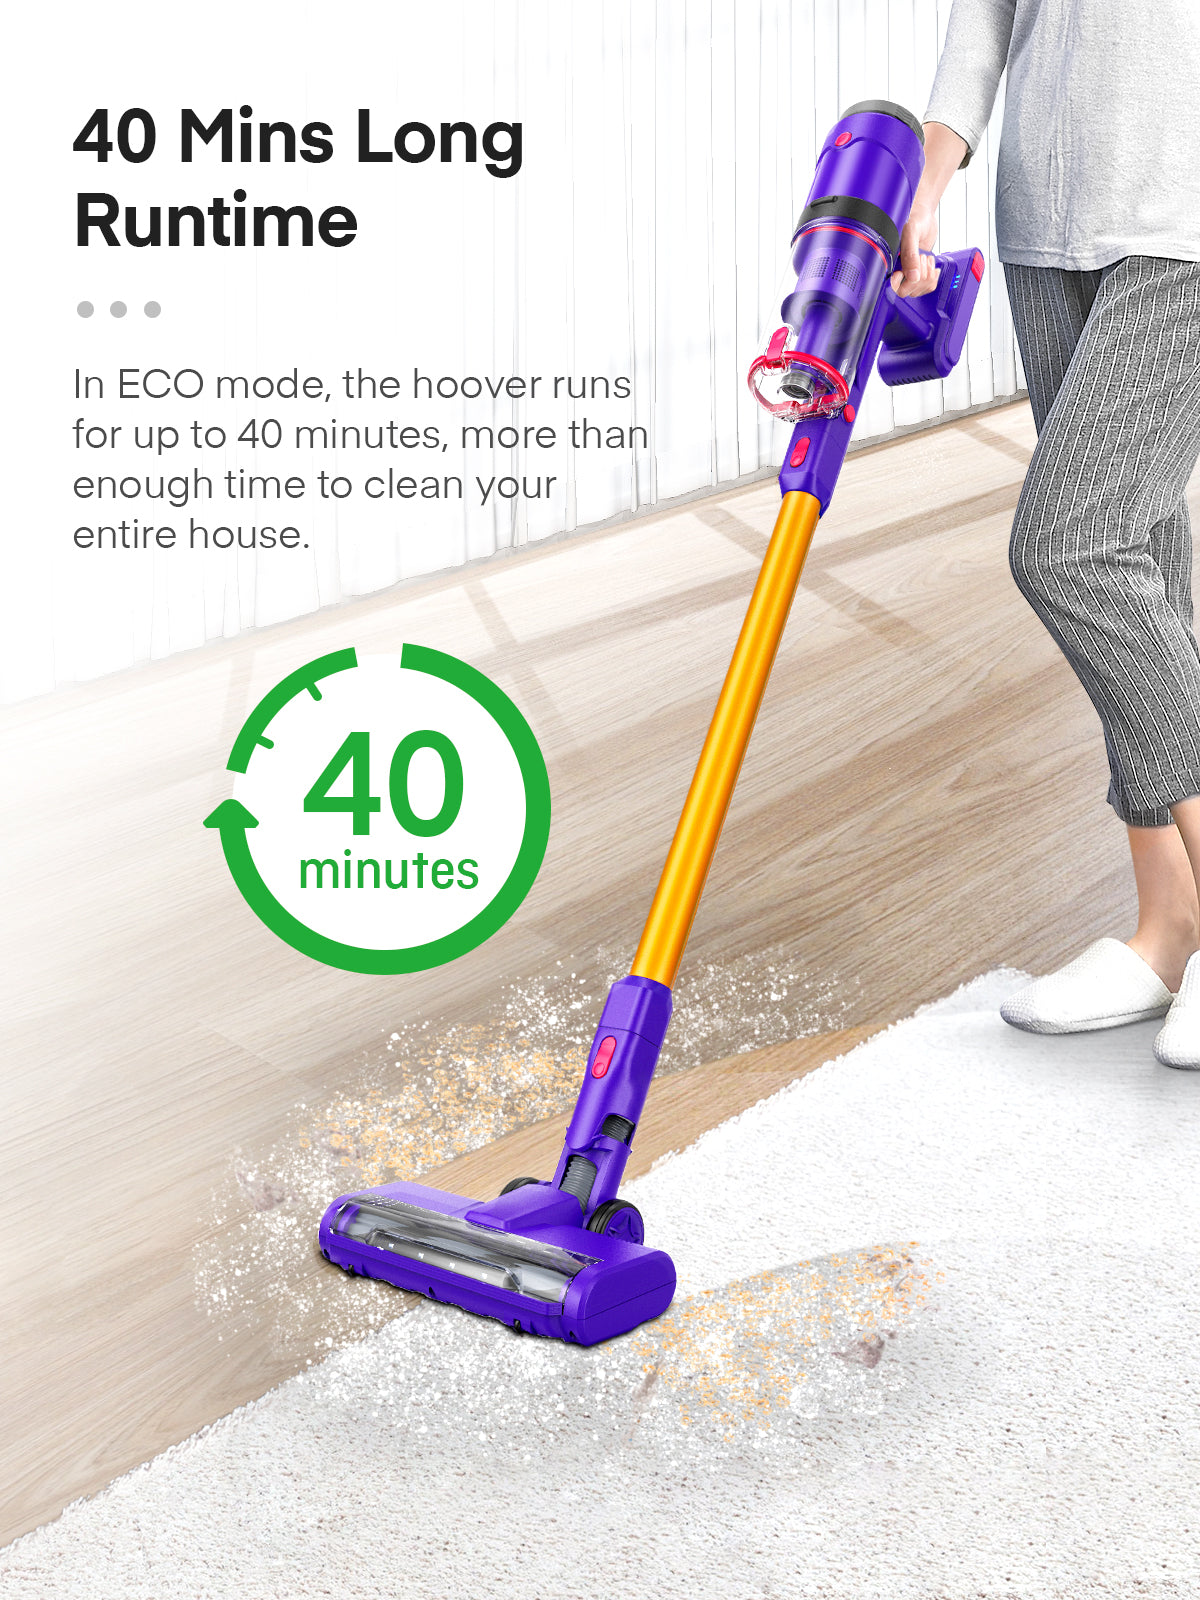 AUYOU Cordless Vacuum Cleaner 5 in 1 Ultra-Lightweight 20Kpa Power Suction Handheld Vacuum Cleaner with Washable HEPA Filter for Home, Car, Pet Hair, Carpet, Hard Floor